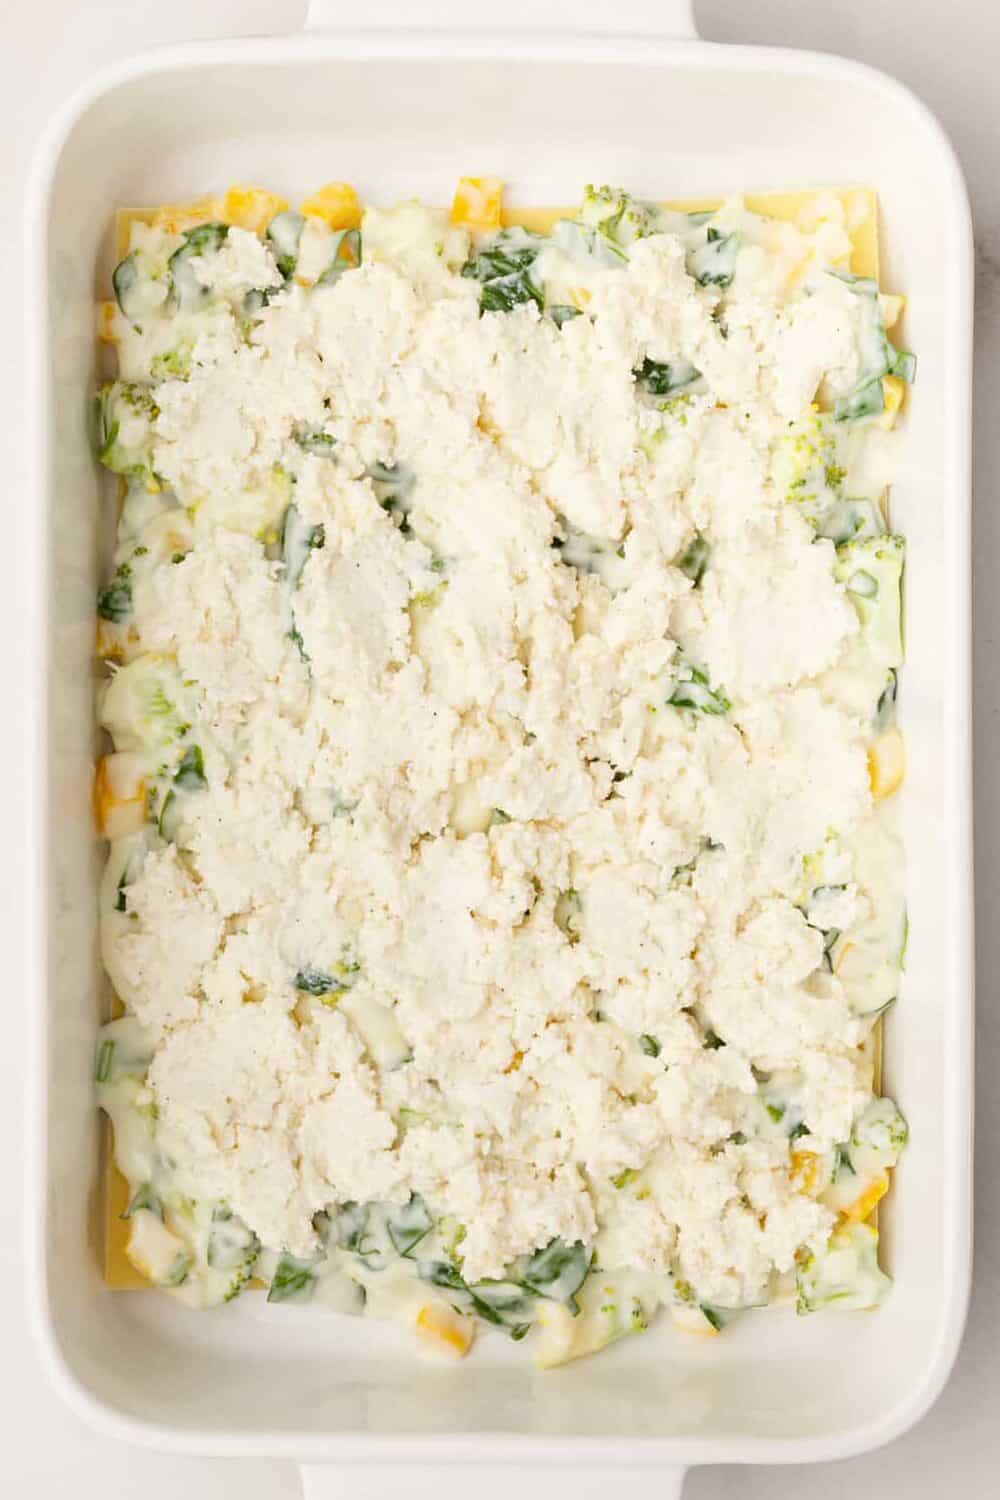 Top down image of a 9 x 13 casserole dish with vegetable lasagna filling and pasta layers.